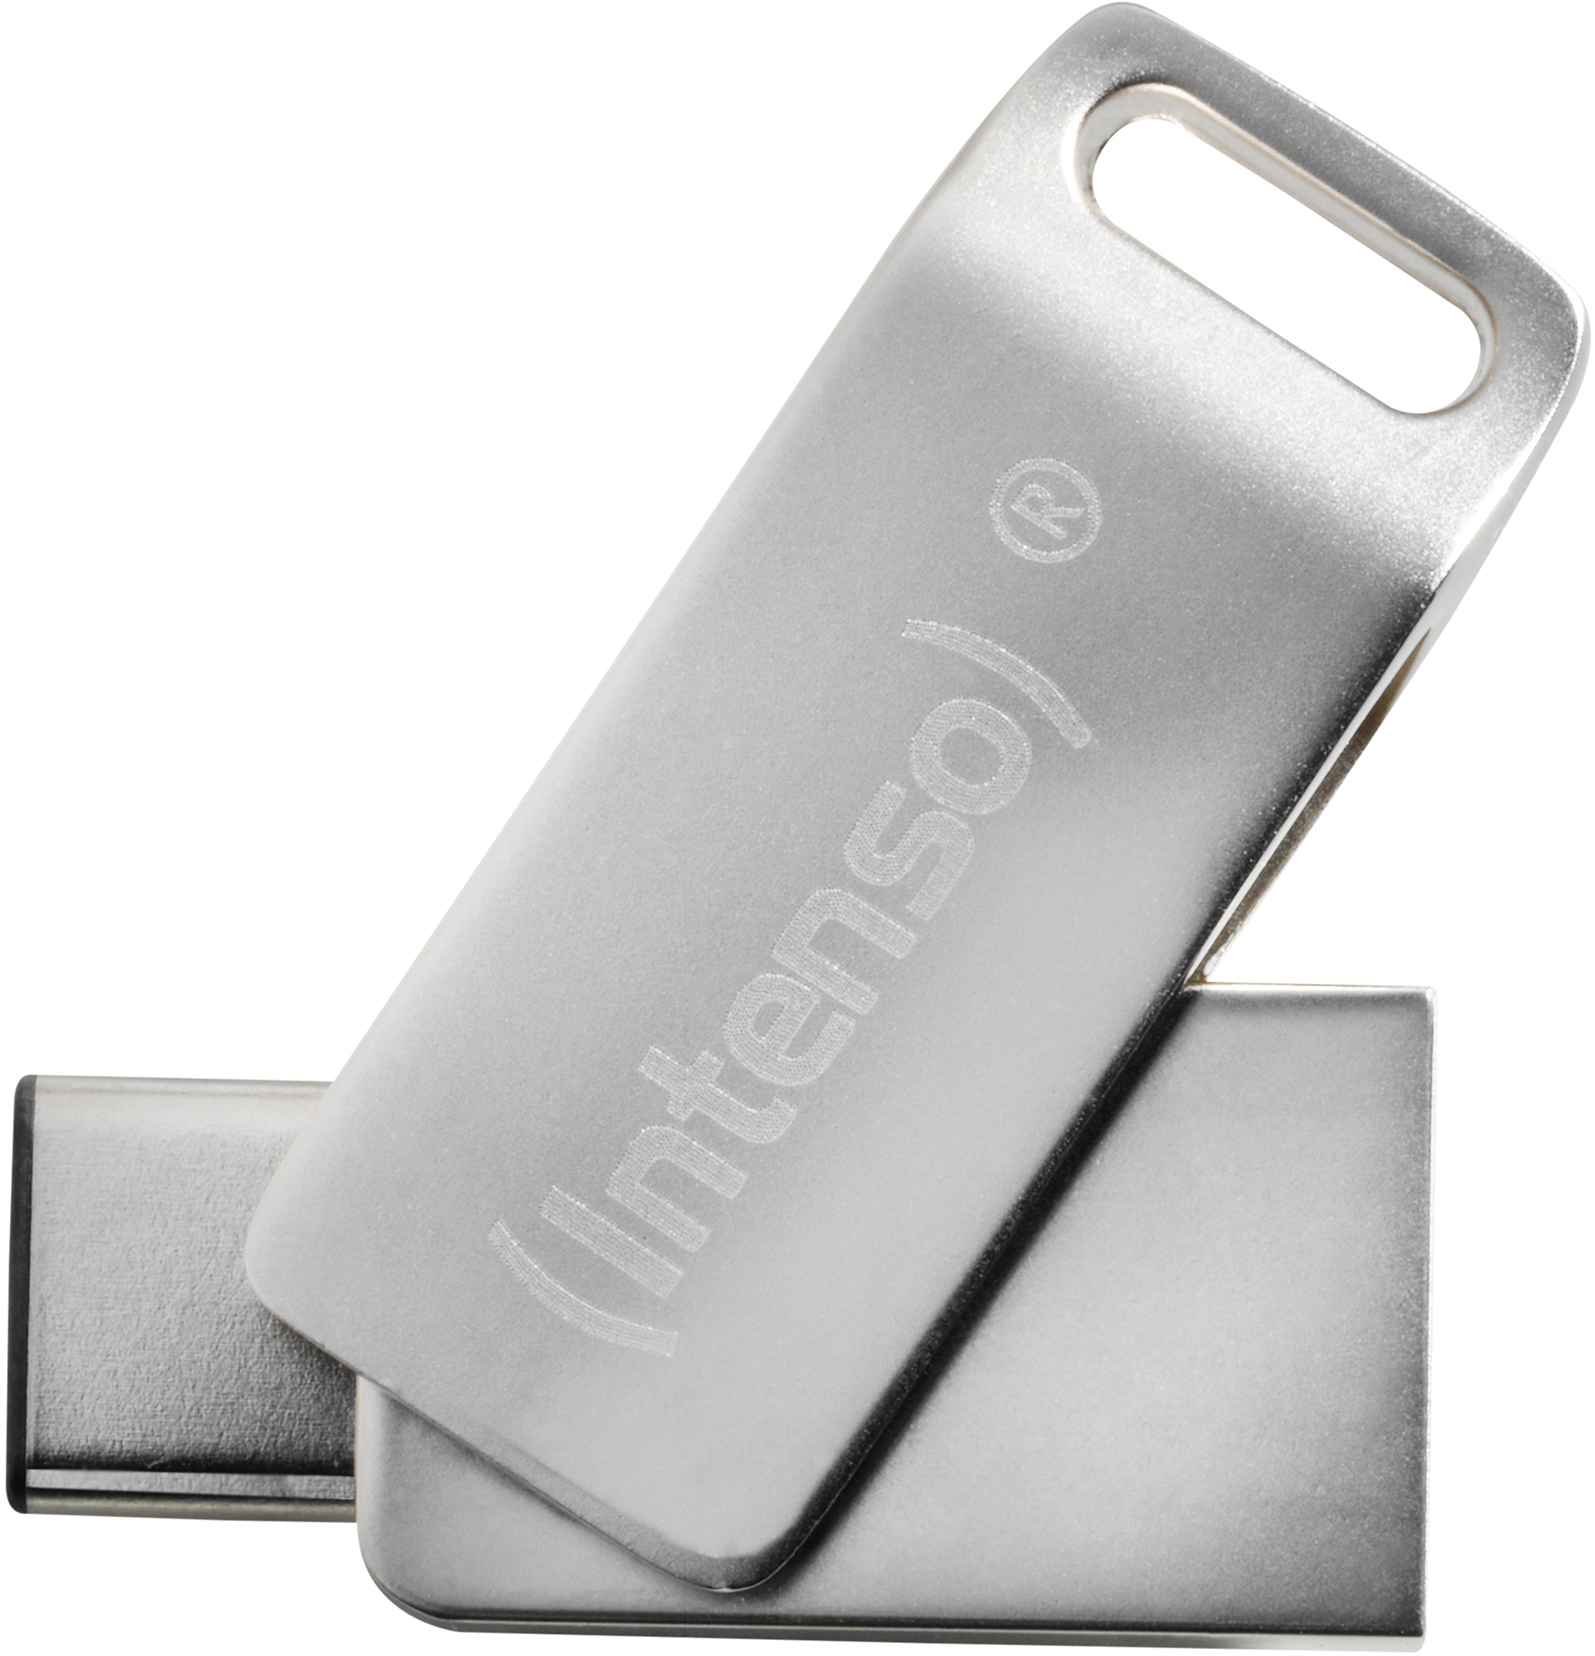 70 GB, 32 INTENSO CMOBILE USB-Stick, MB/s, LINE Silber